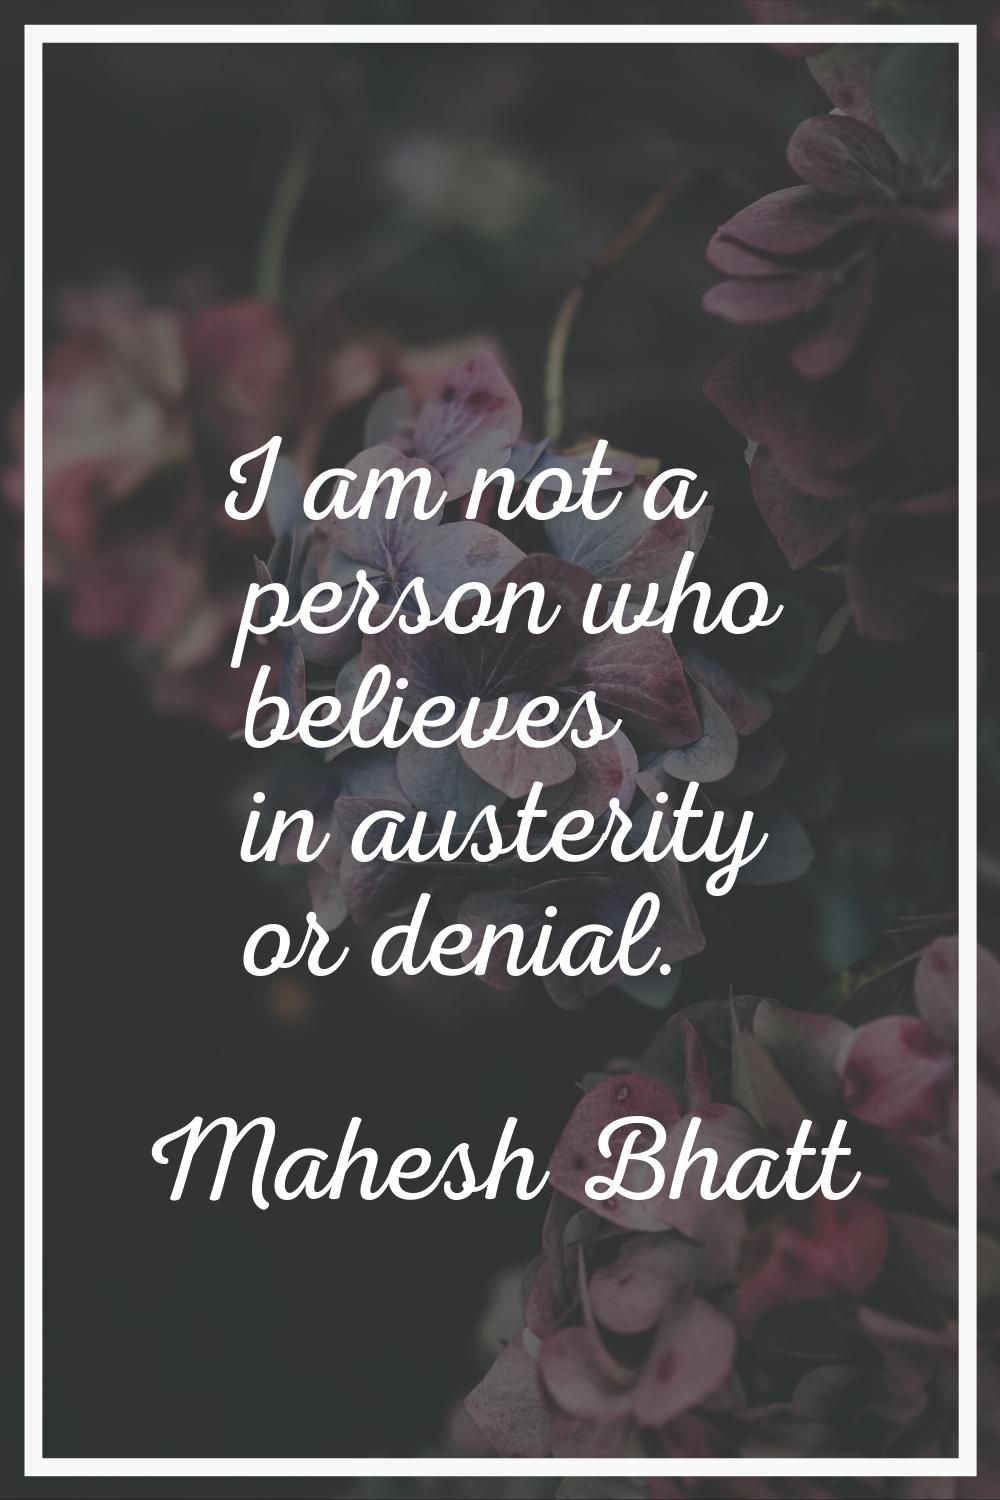 I am not a person who believes in austerity or denial.